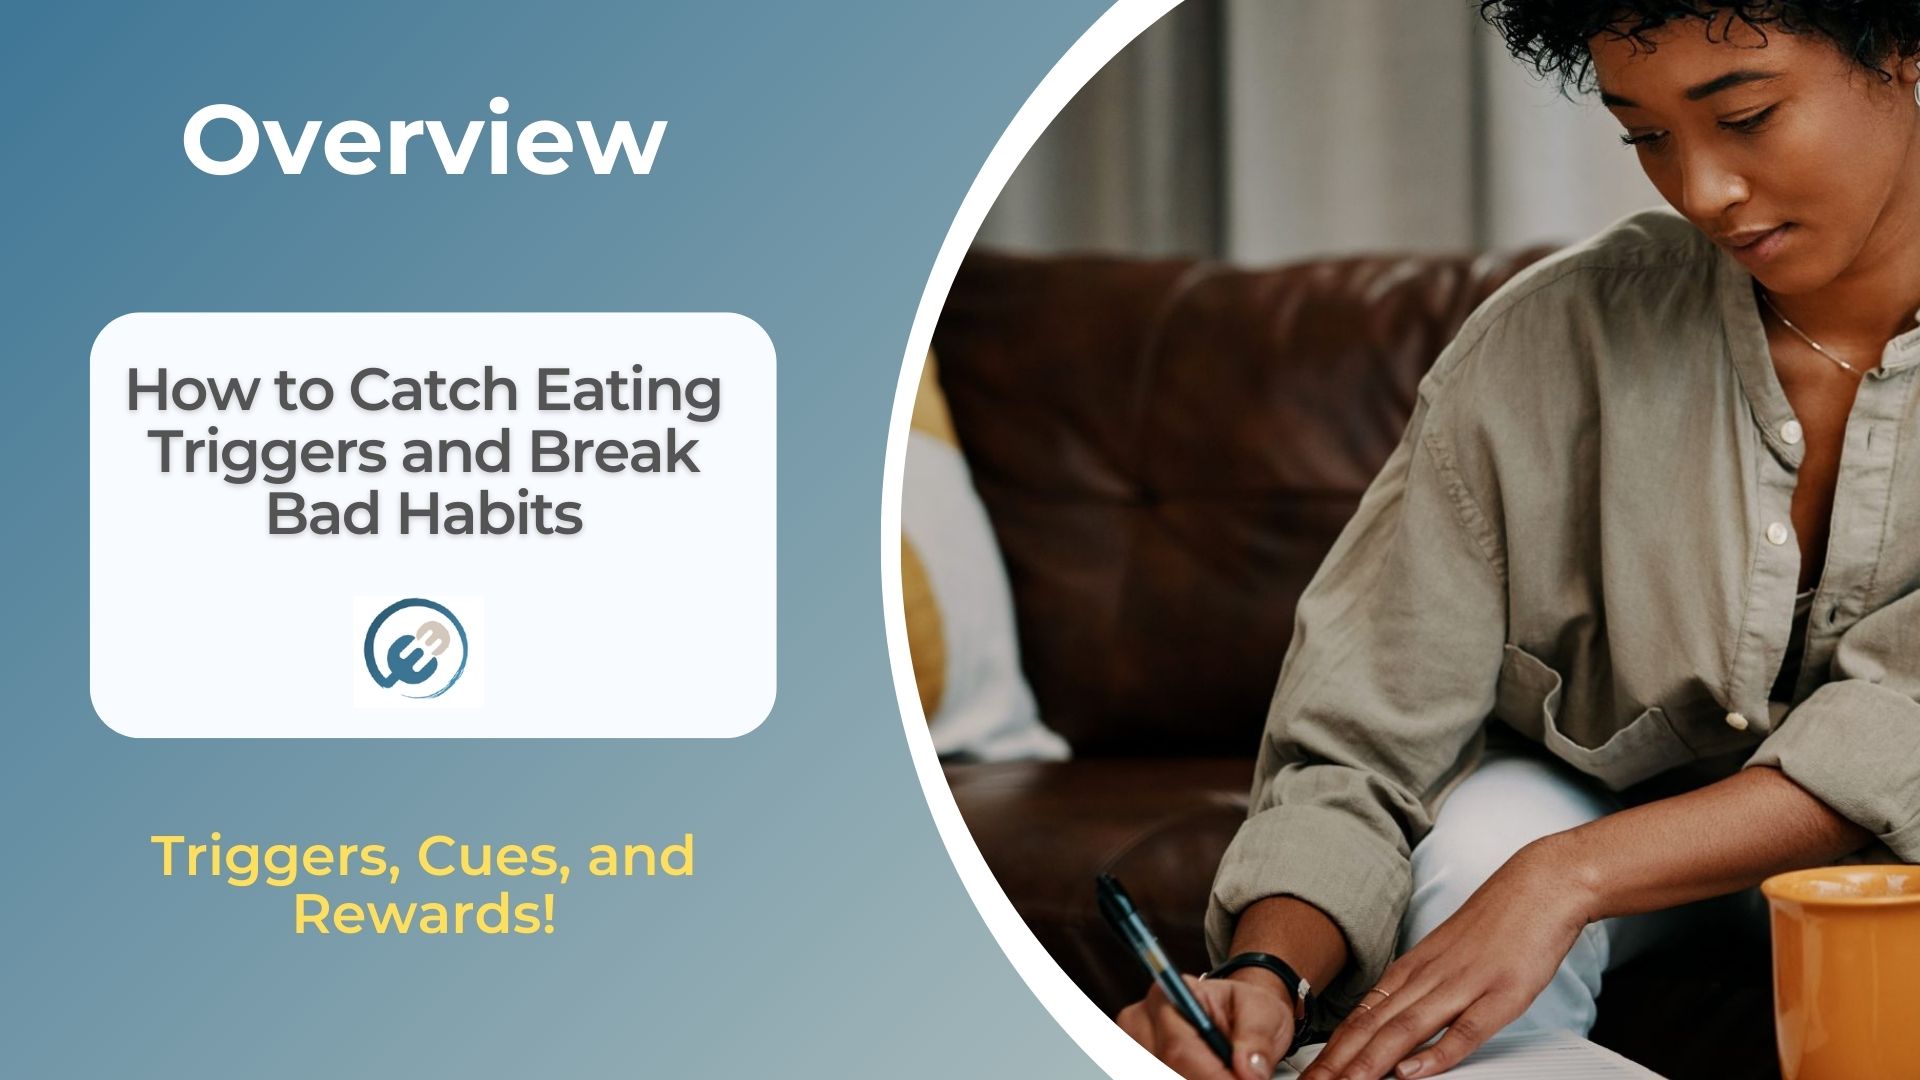 How to Catch Eating Triggers and Break Bad Habits (1)